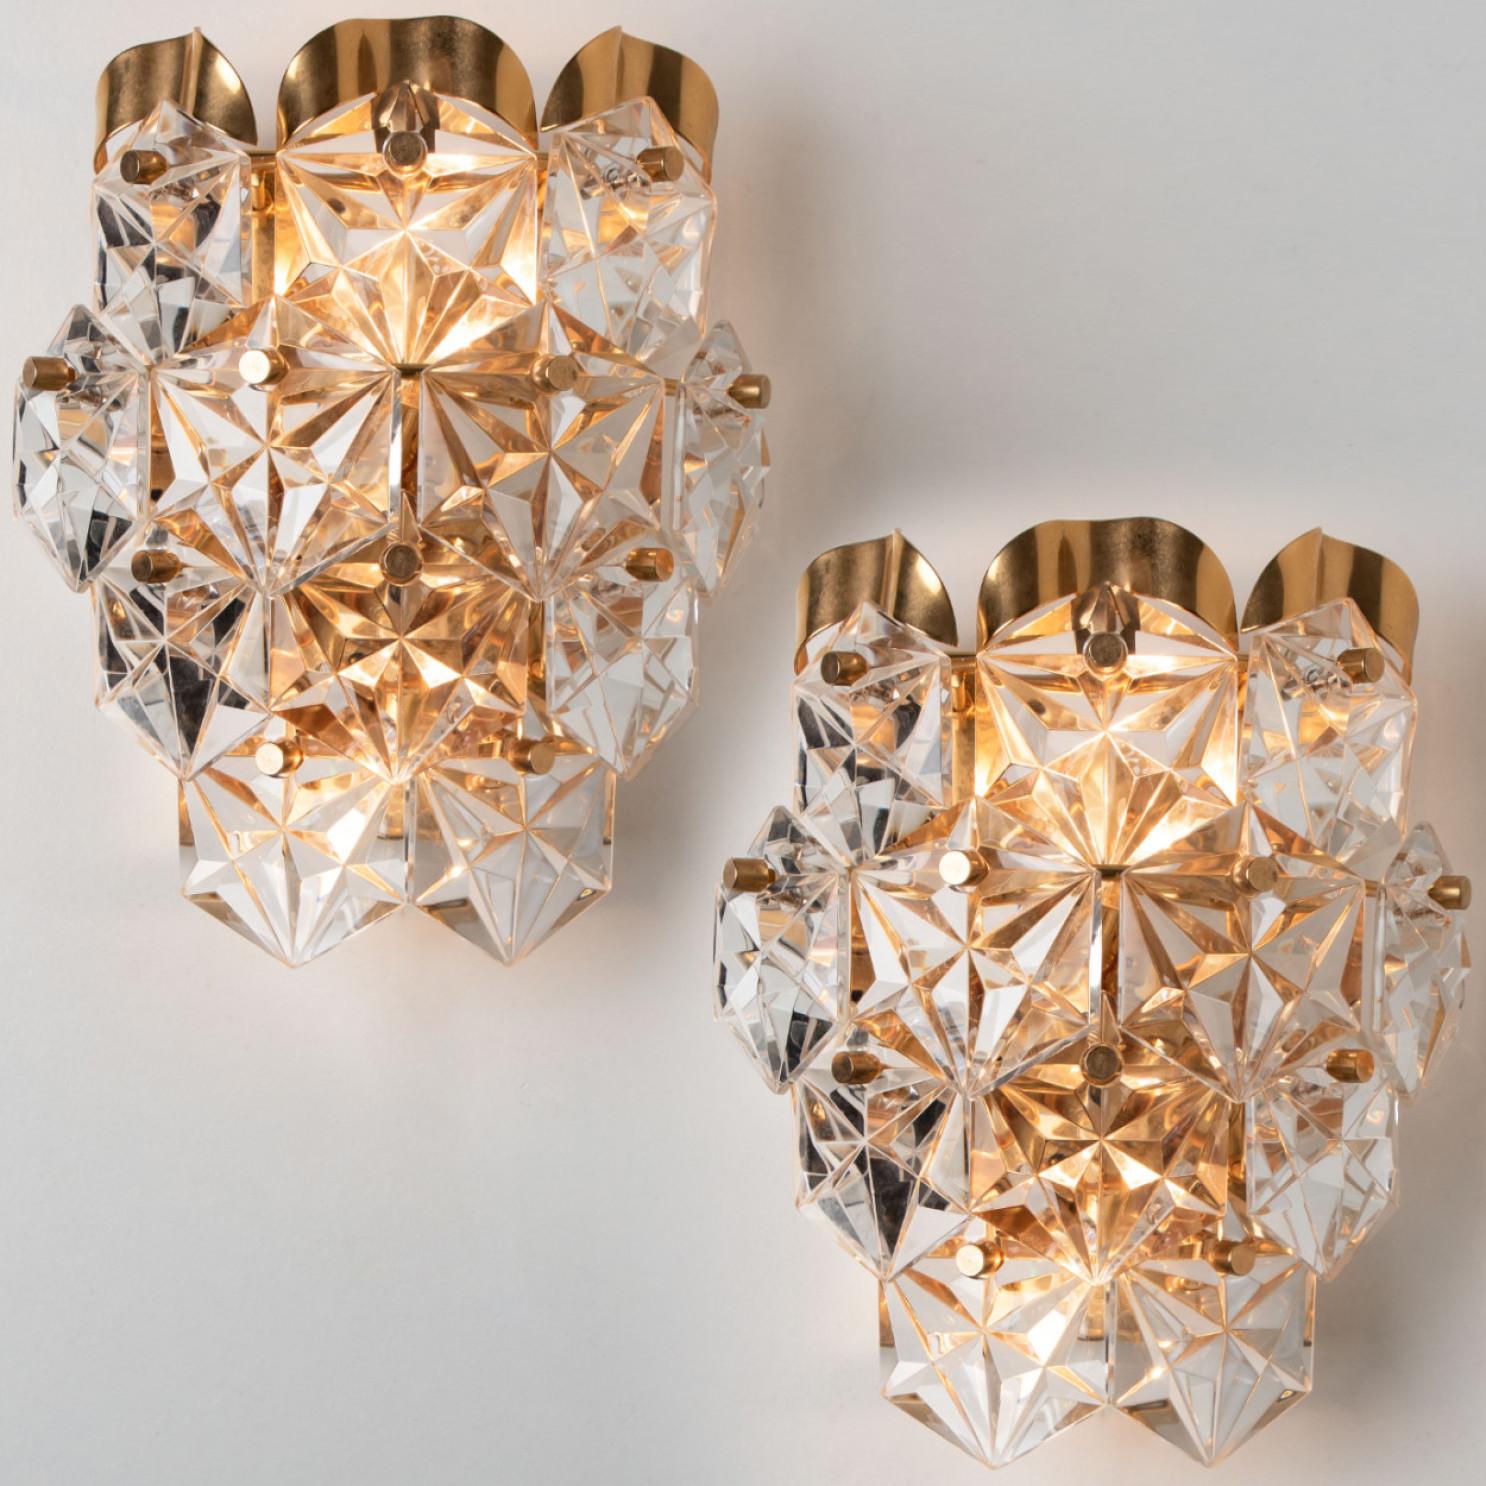 A luxurious pair of gold-plated frames and thick diamond crystal sconces by the famed maker, Kinkeldey. Made in Germany around 1970. (late 1960s, early 1970s)
Two light sources. Very elegant light fixtures, comfortable with all decor periods. The